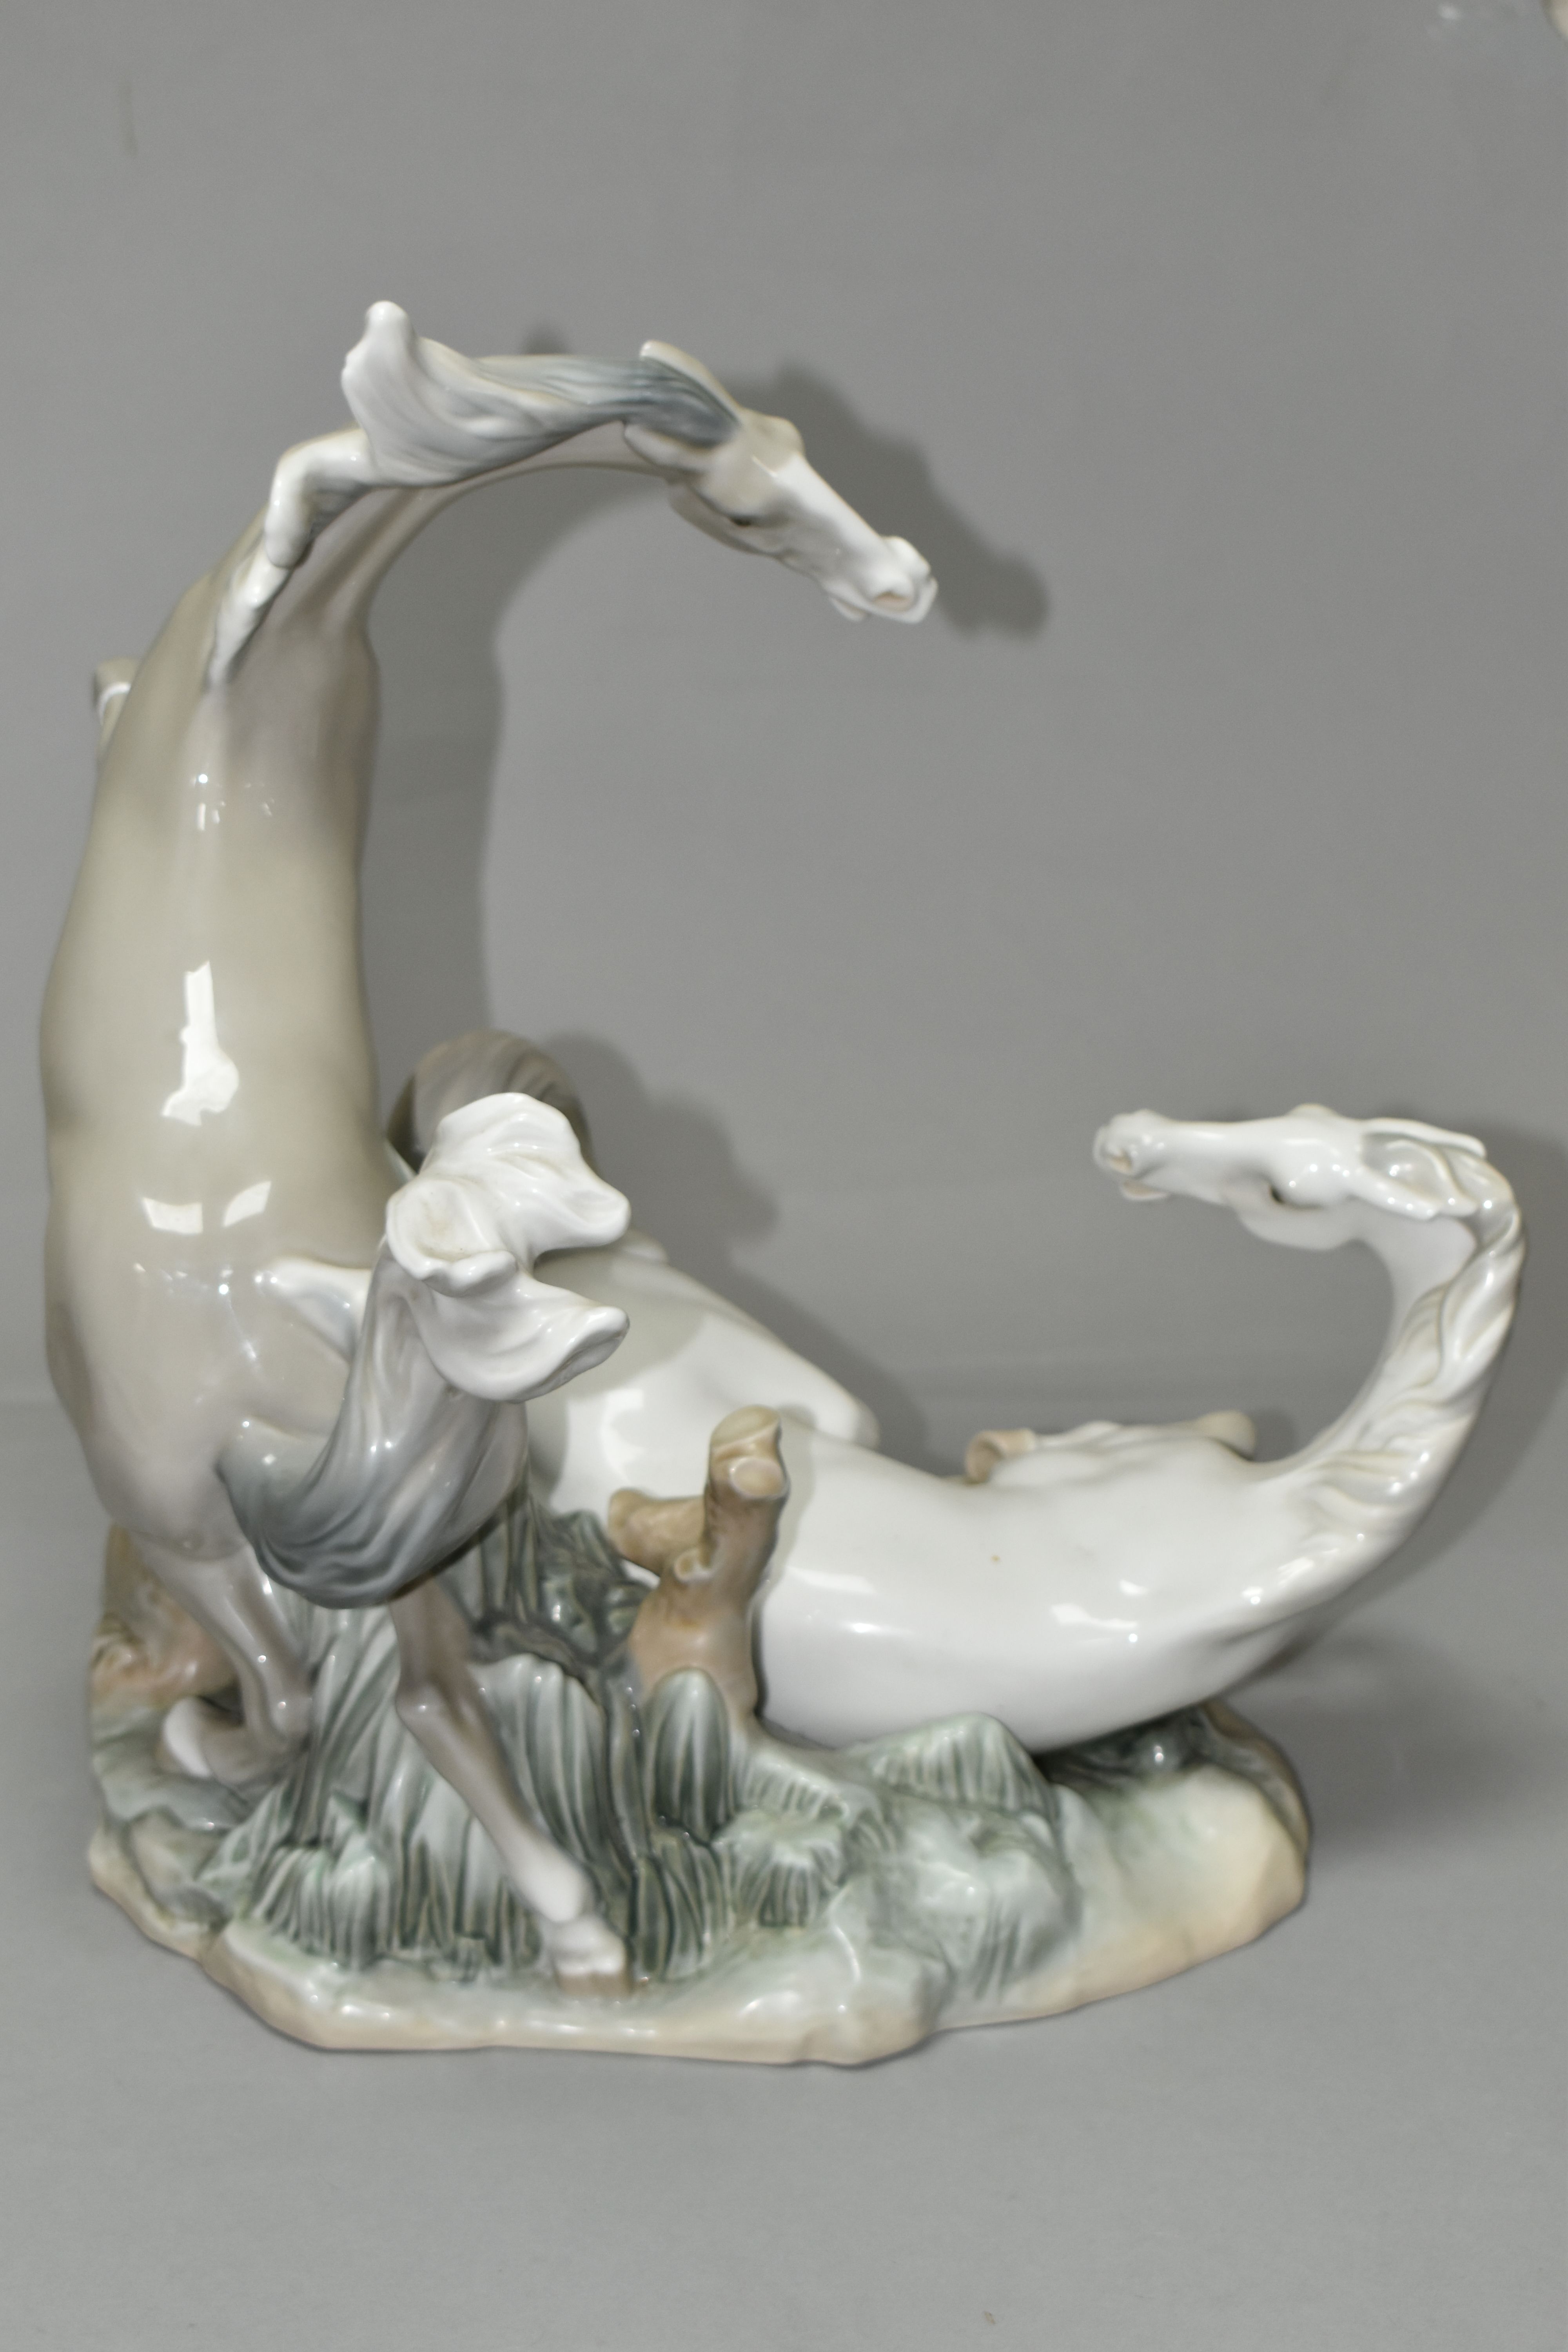 A LLADRO 'GROUP OF HORSES' FIGURINE, 1022 design by Fulgencio Garcia 1969-2005, height 37cm (1) ( - Image 6 of 10